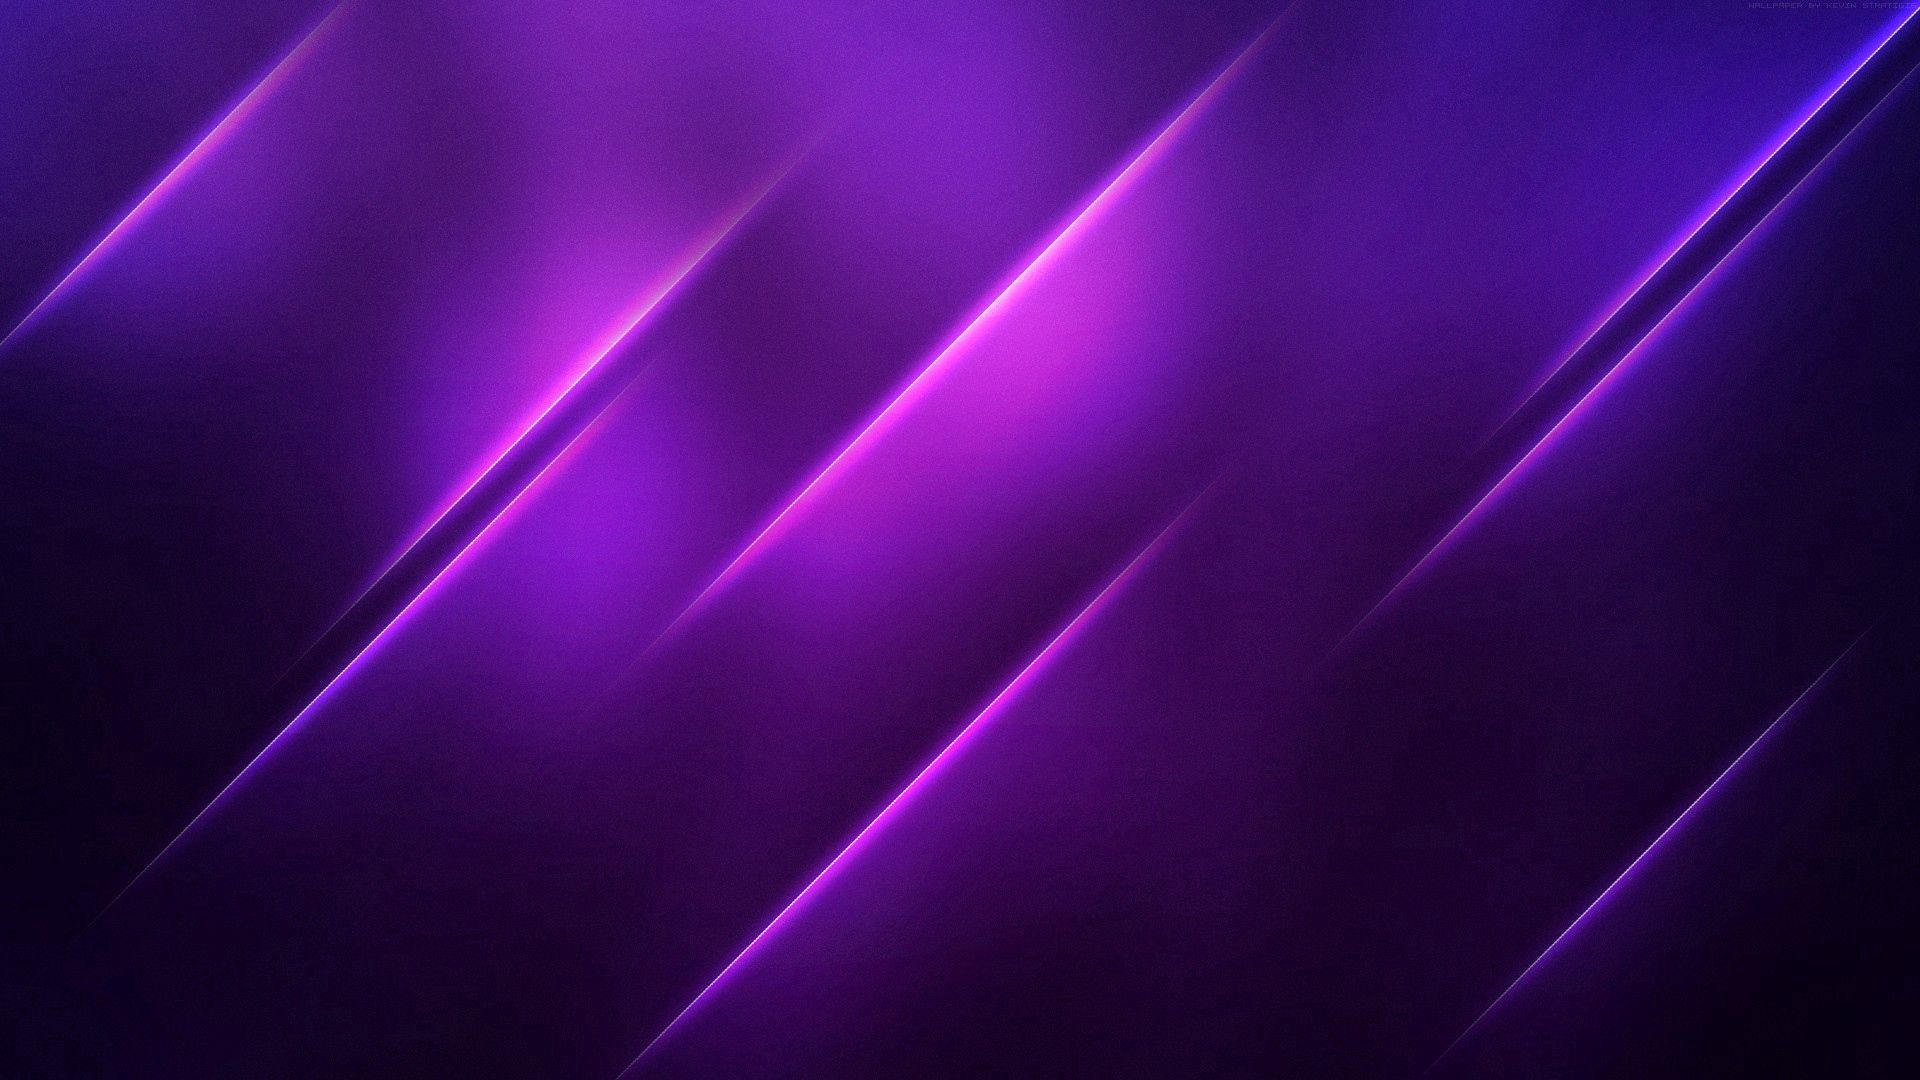 violet, obliquely, abstract, bright, lines, purple